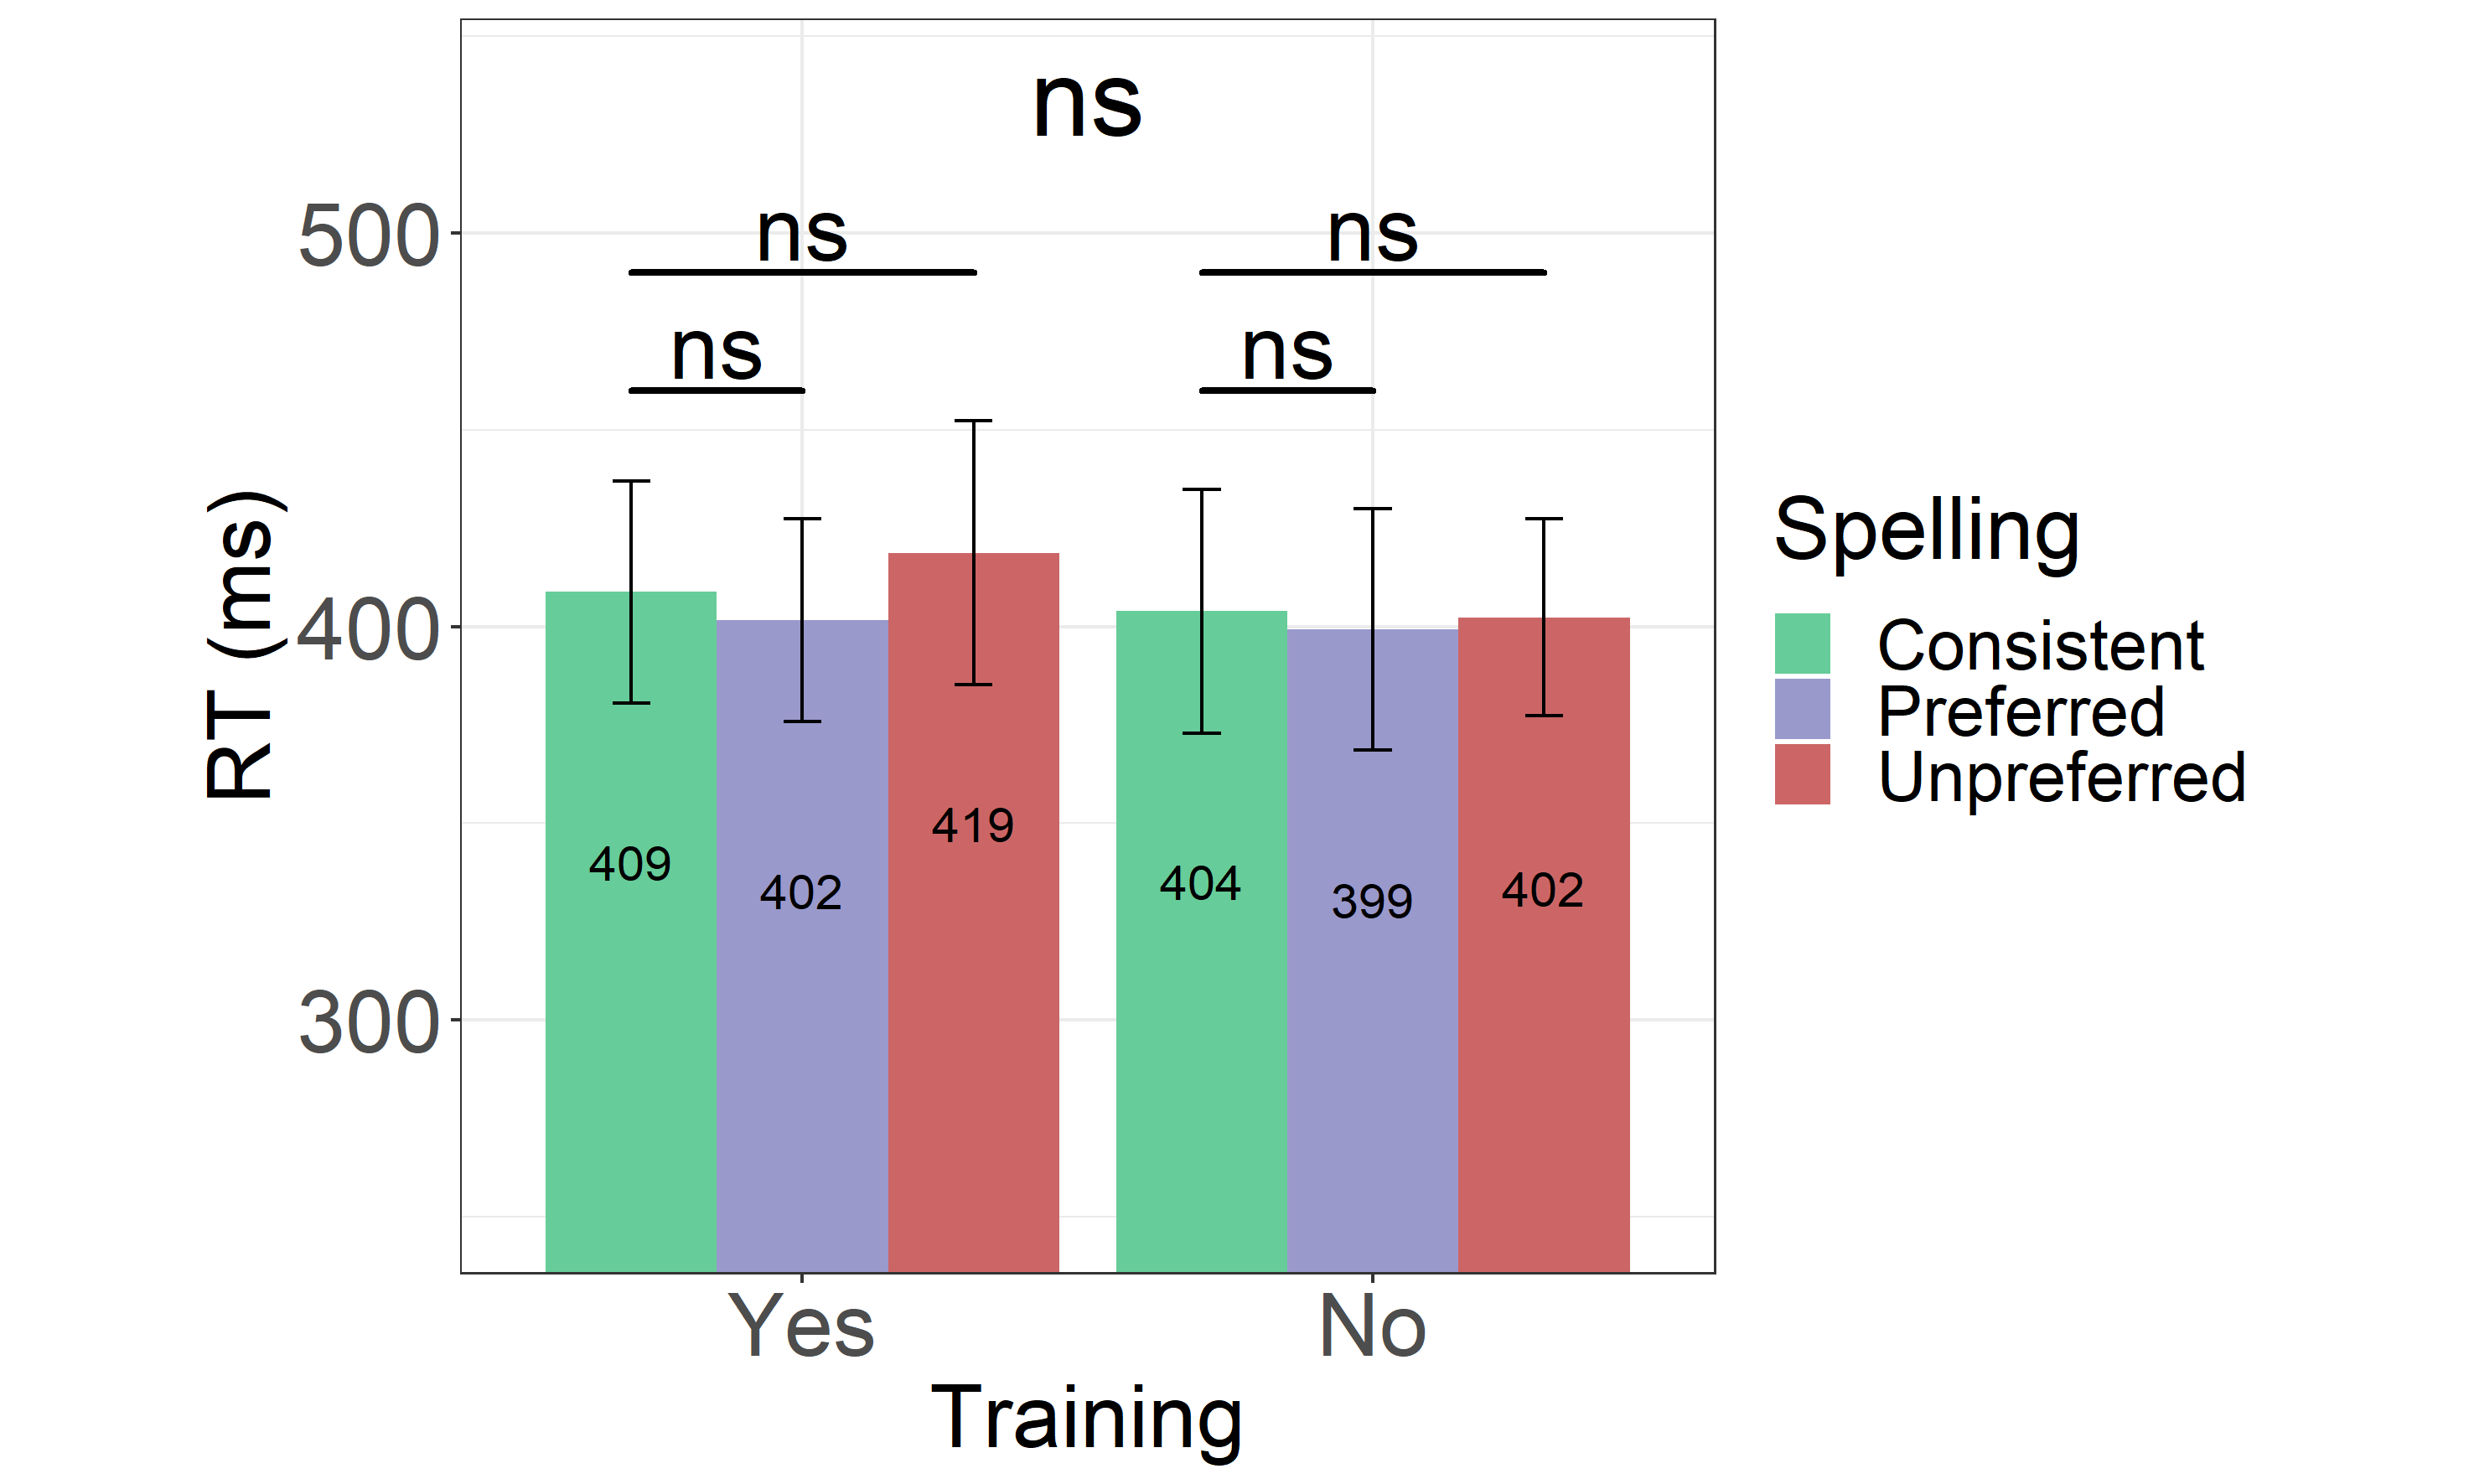 Reaction Times in the Passive Learning Group From the Experiment 3. Reaction times for for both trained (Yes) and untrained (No) consistent, preferred and unpreferred word spellings. Error bars represent the standard error of the mean, and the numbers within the bars represent the means for each condition.